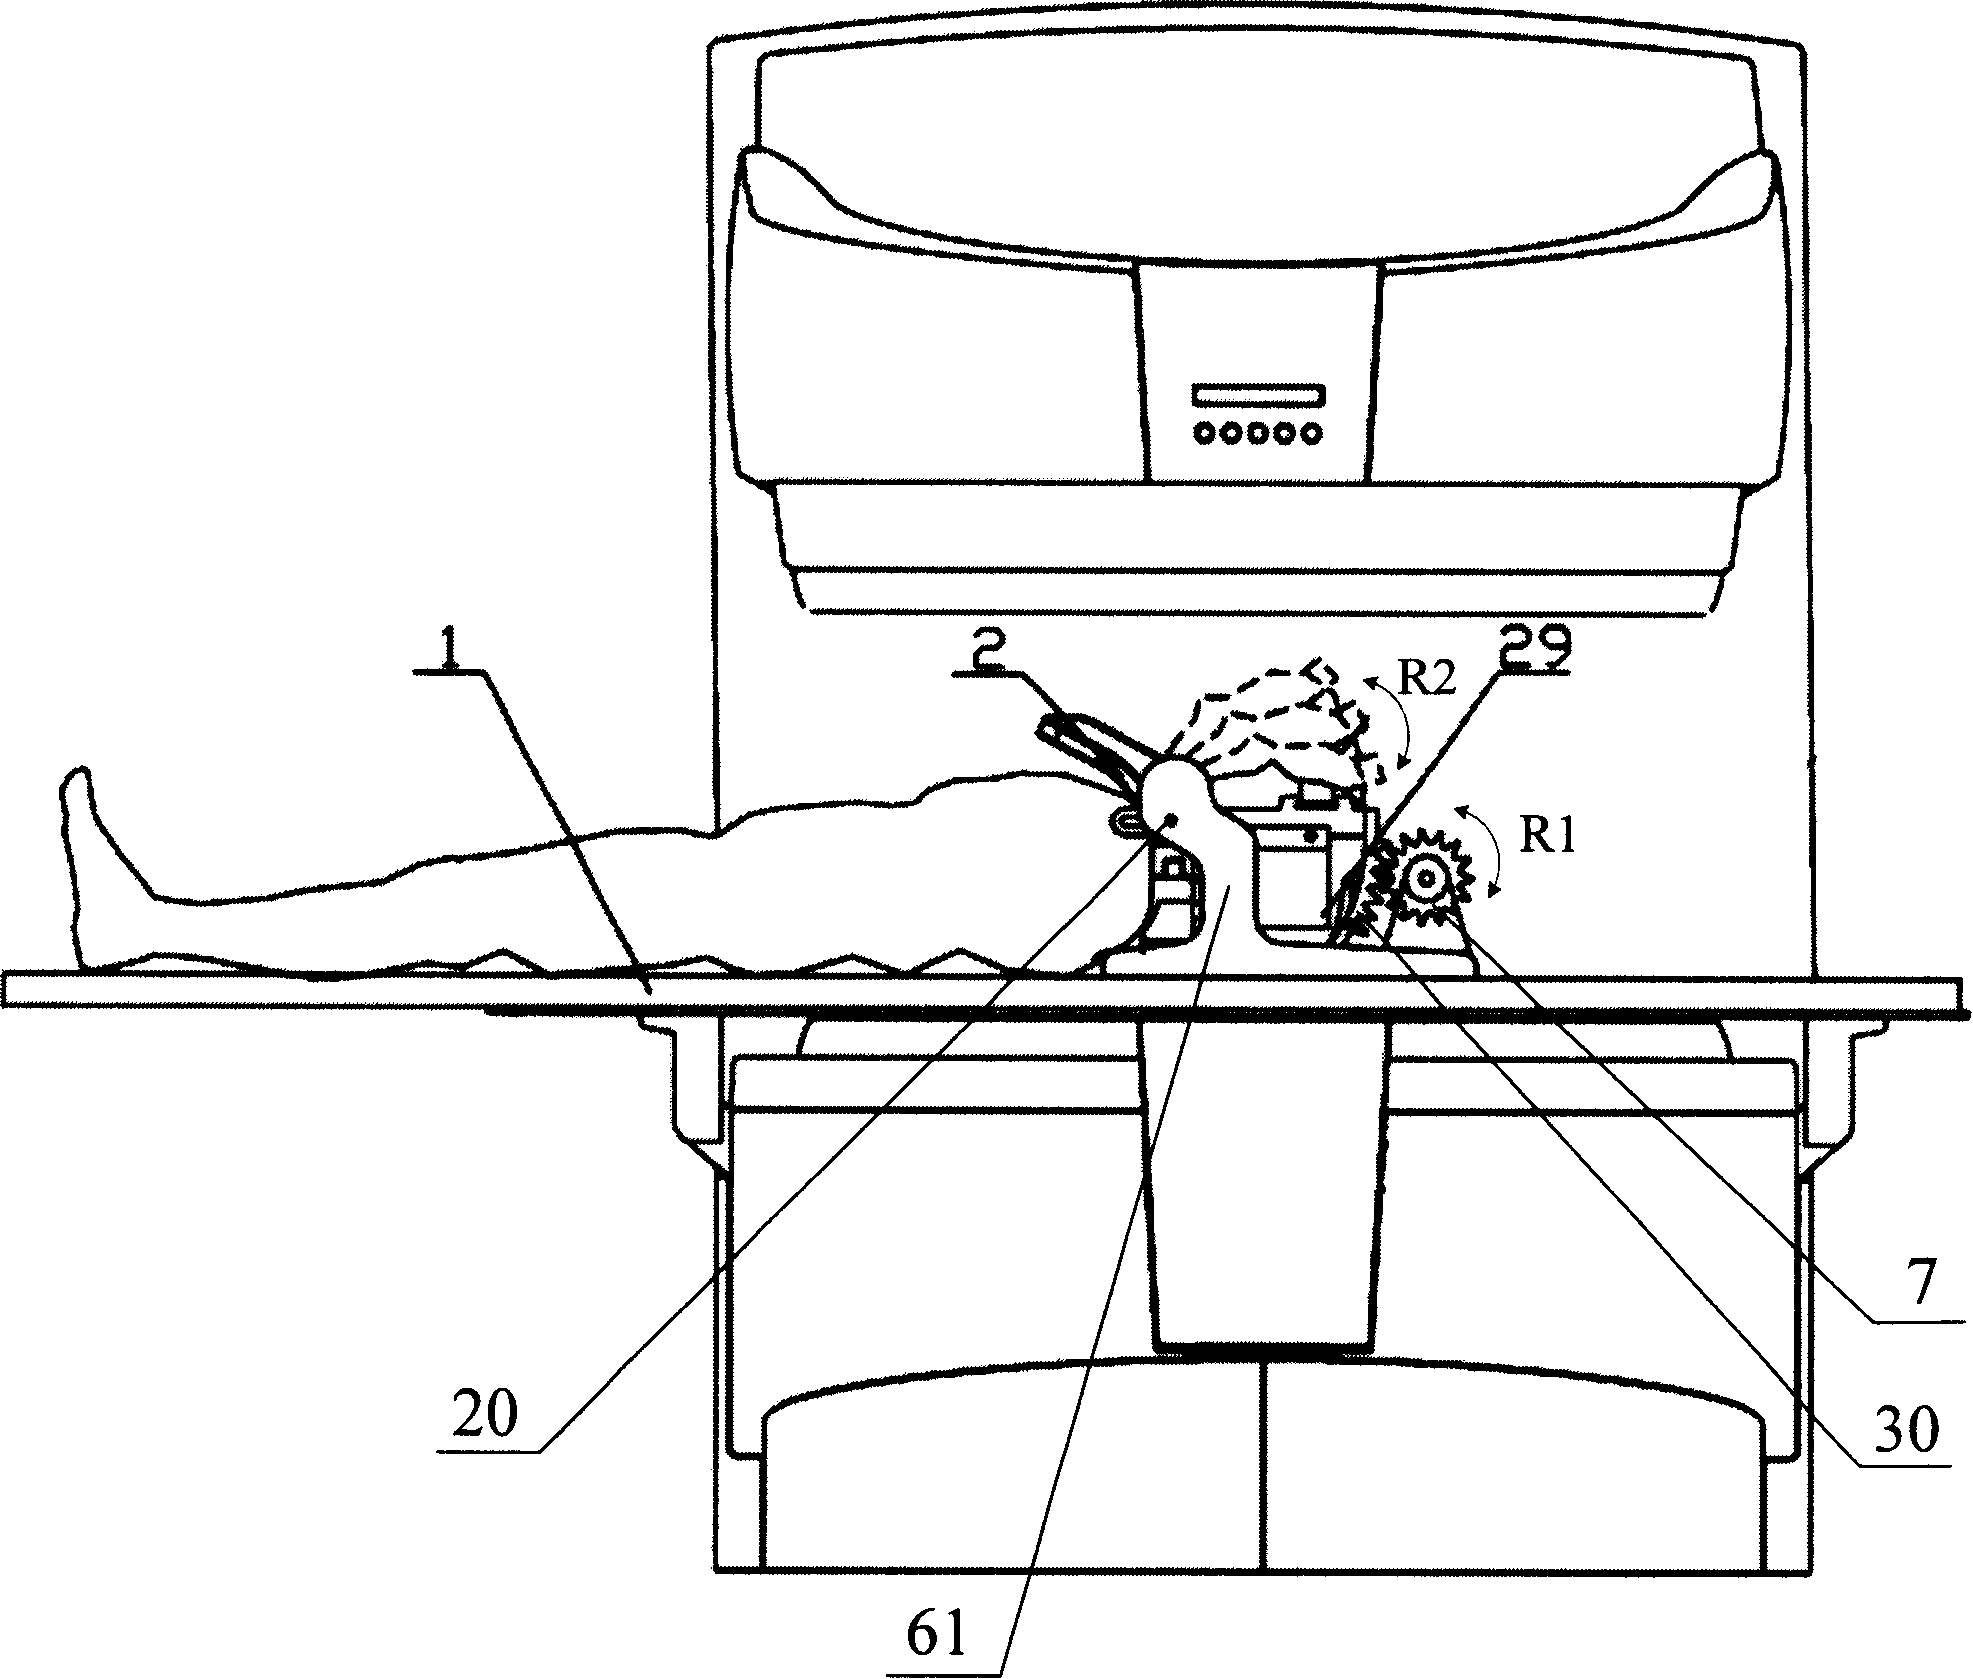 Magnetic resonance imaging control device for movement